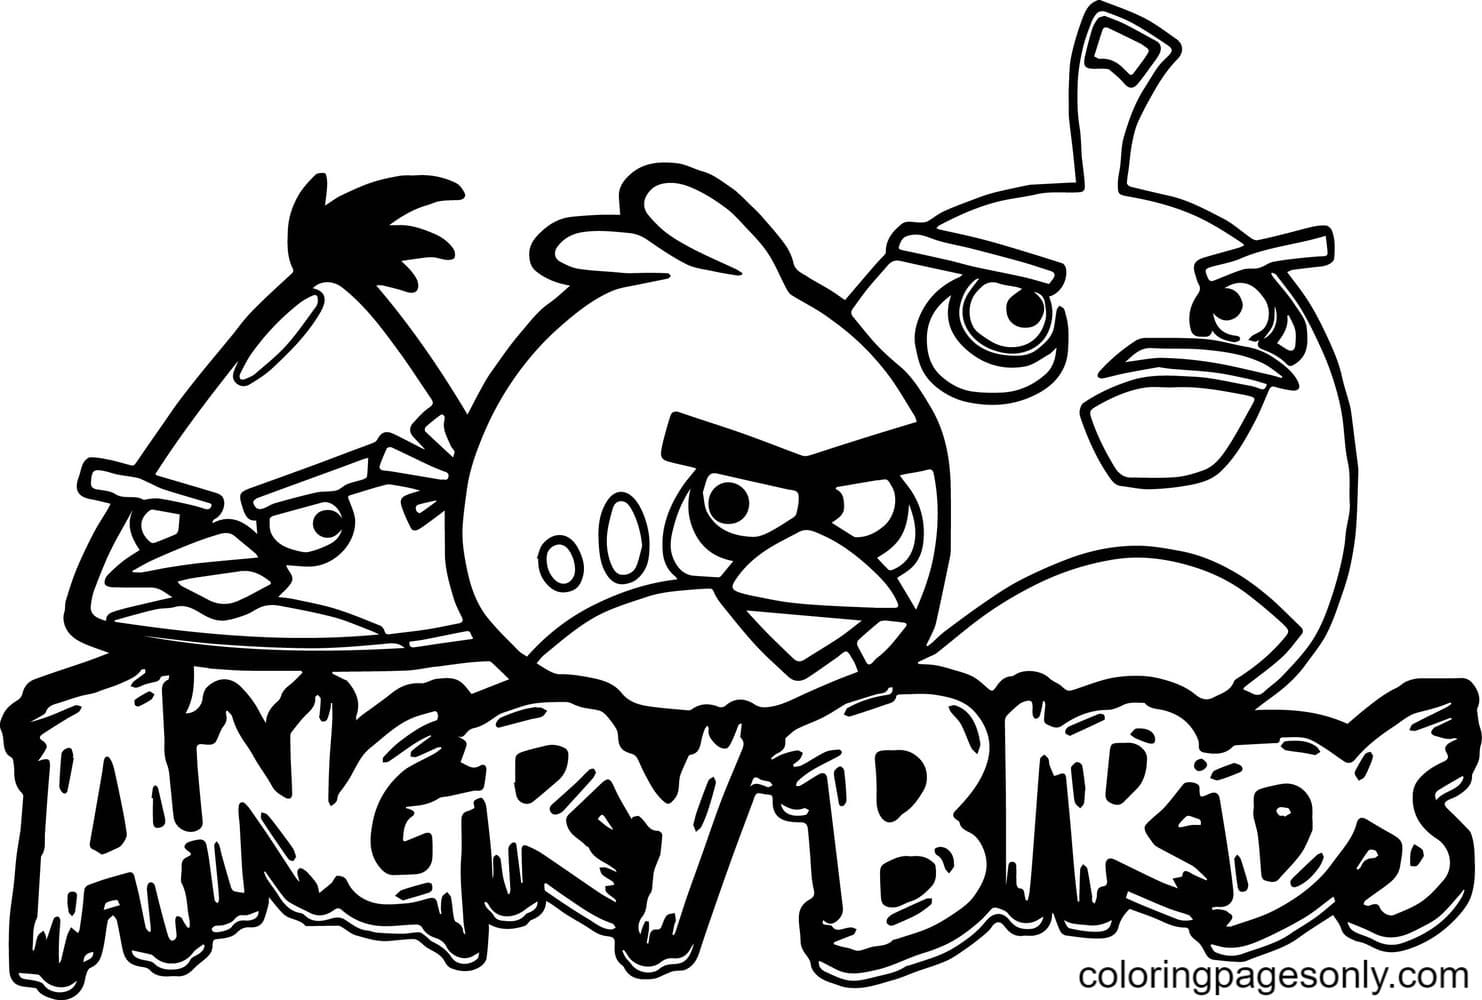 printable angry birds coloring pages angry birds coloring pages coloring pages for kids and adults